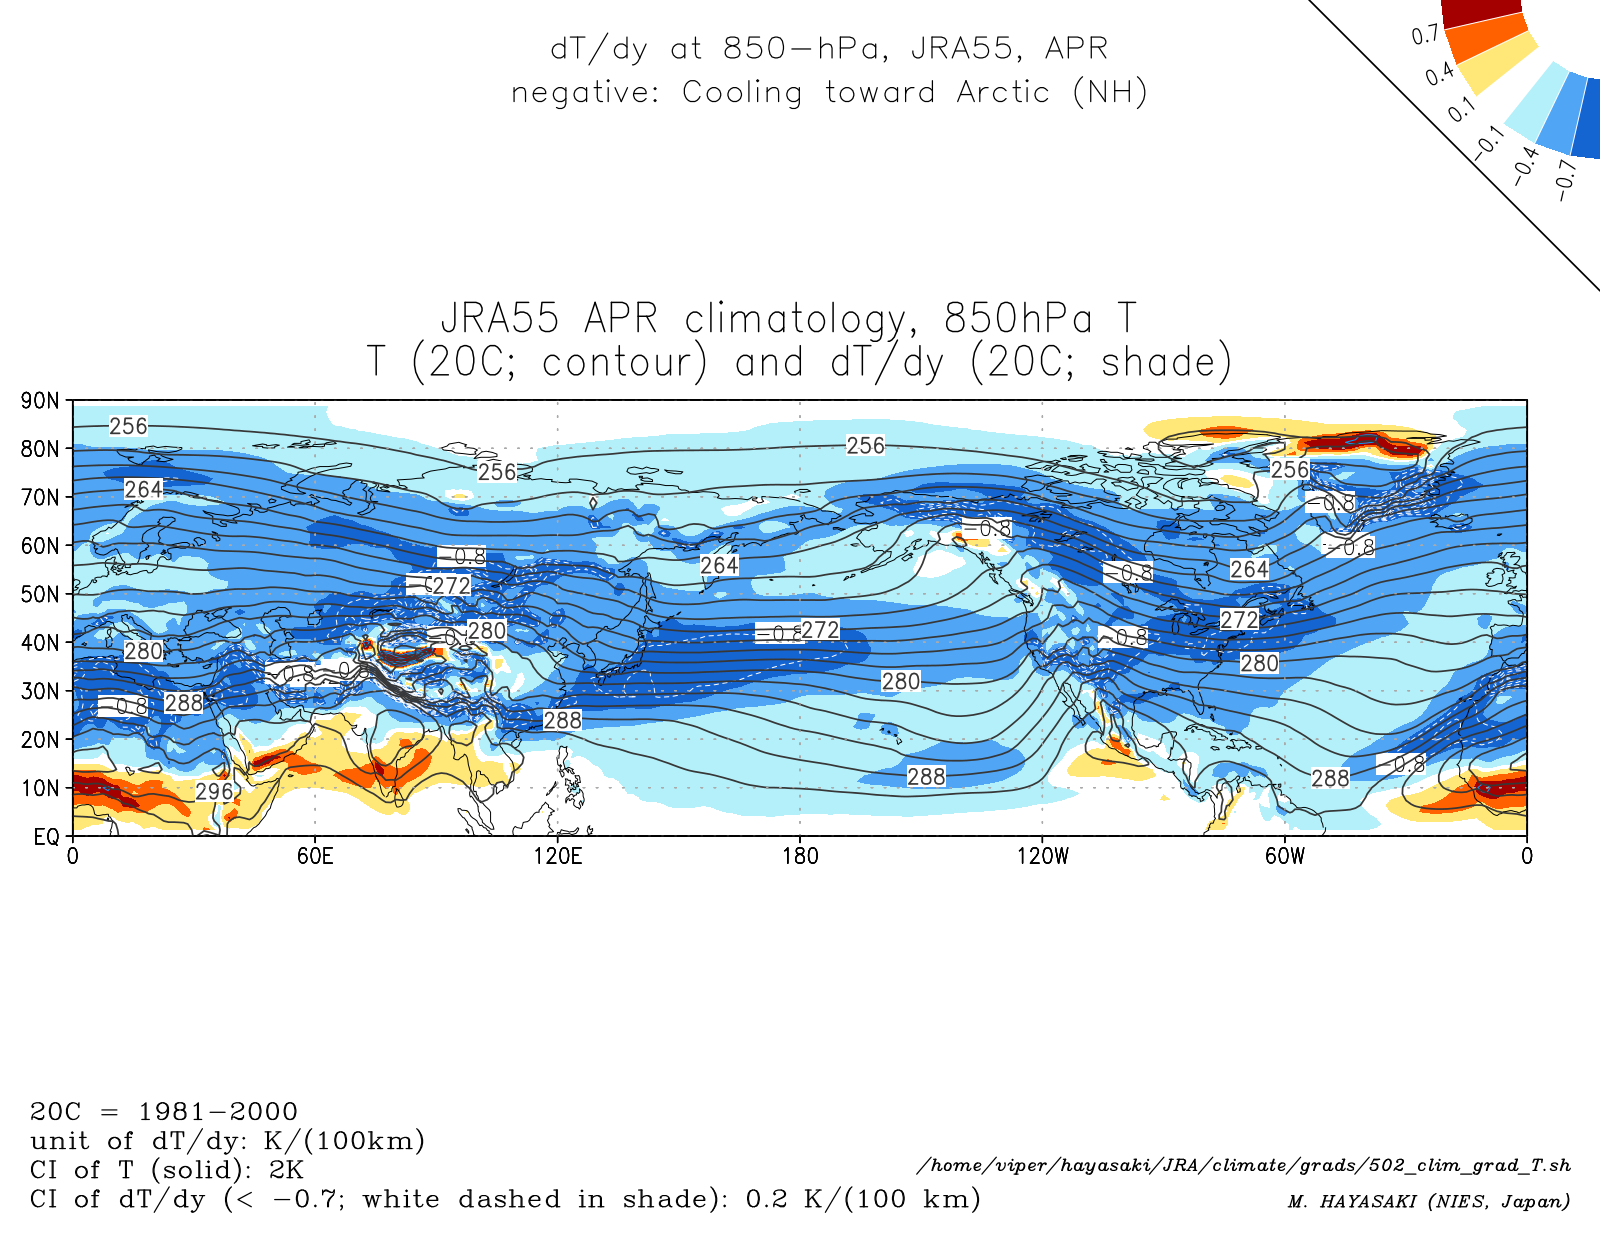 Monthly climatology (Apr) of dT/dy at 850-hPa in the NH